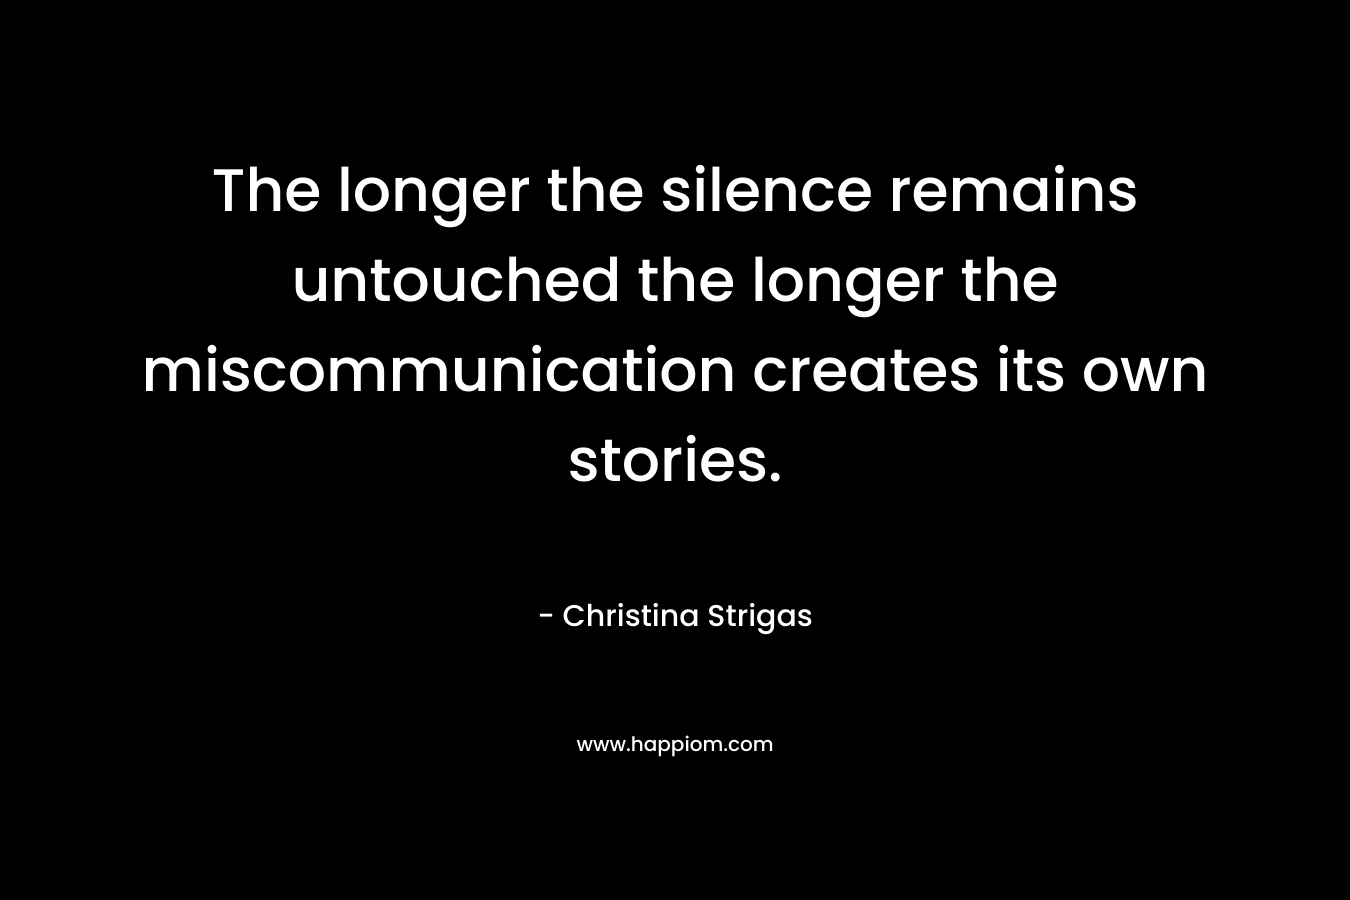 The longer the silence remains untouched the longer the miscommunication creates its own stories.